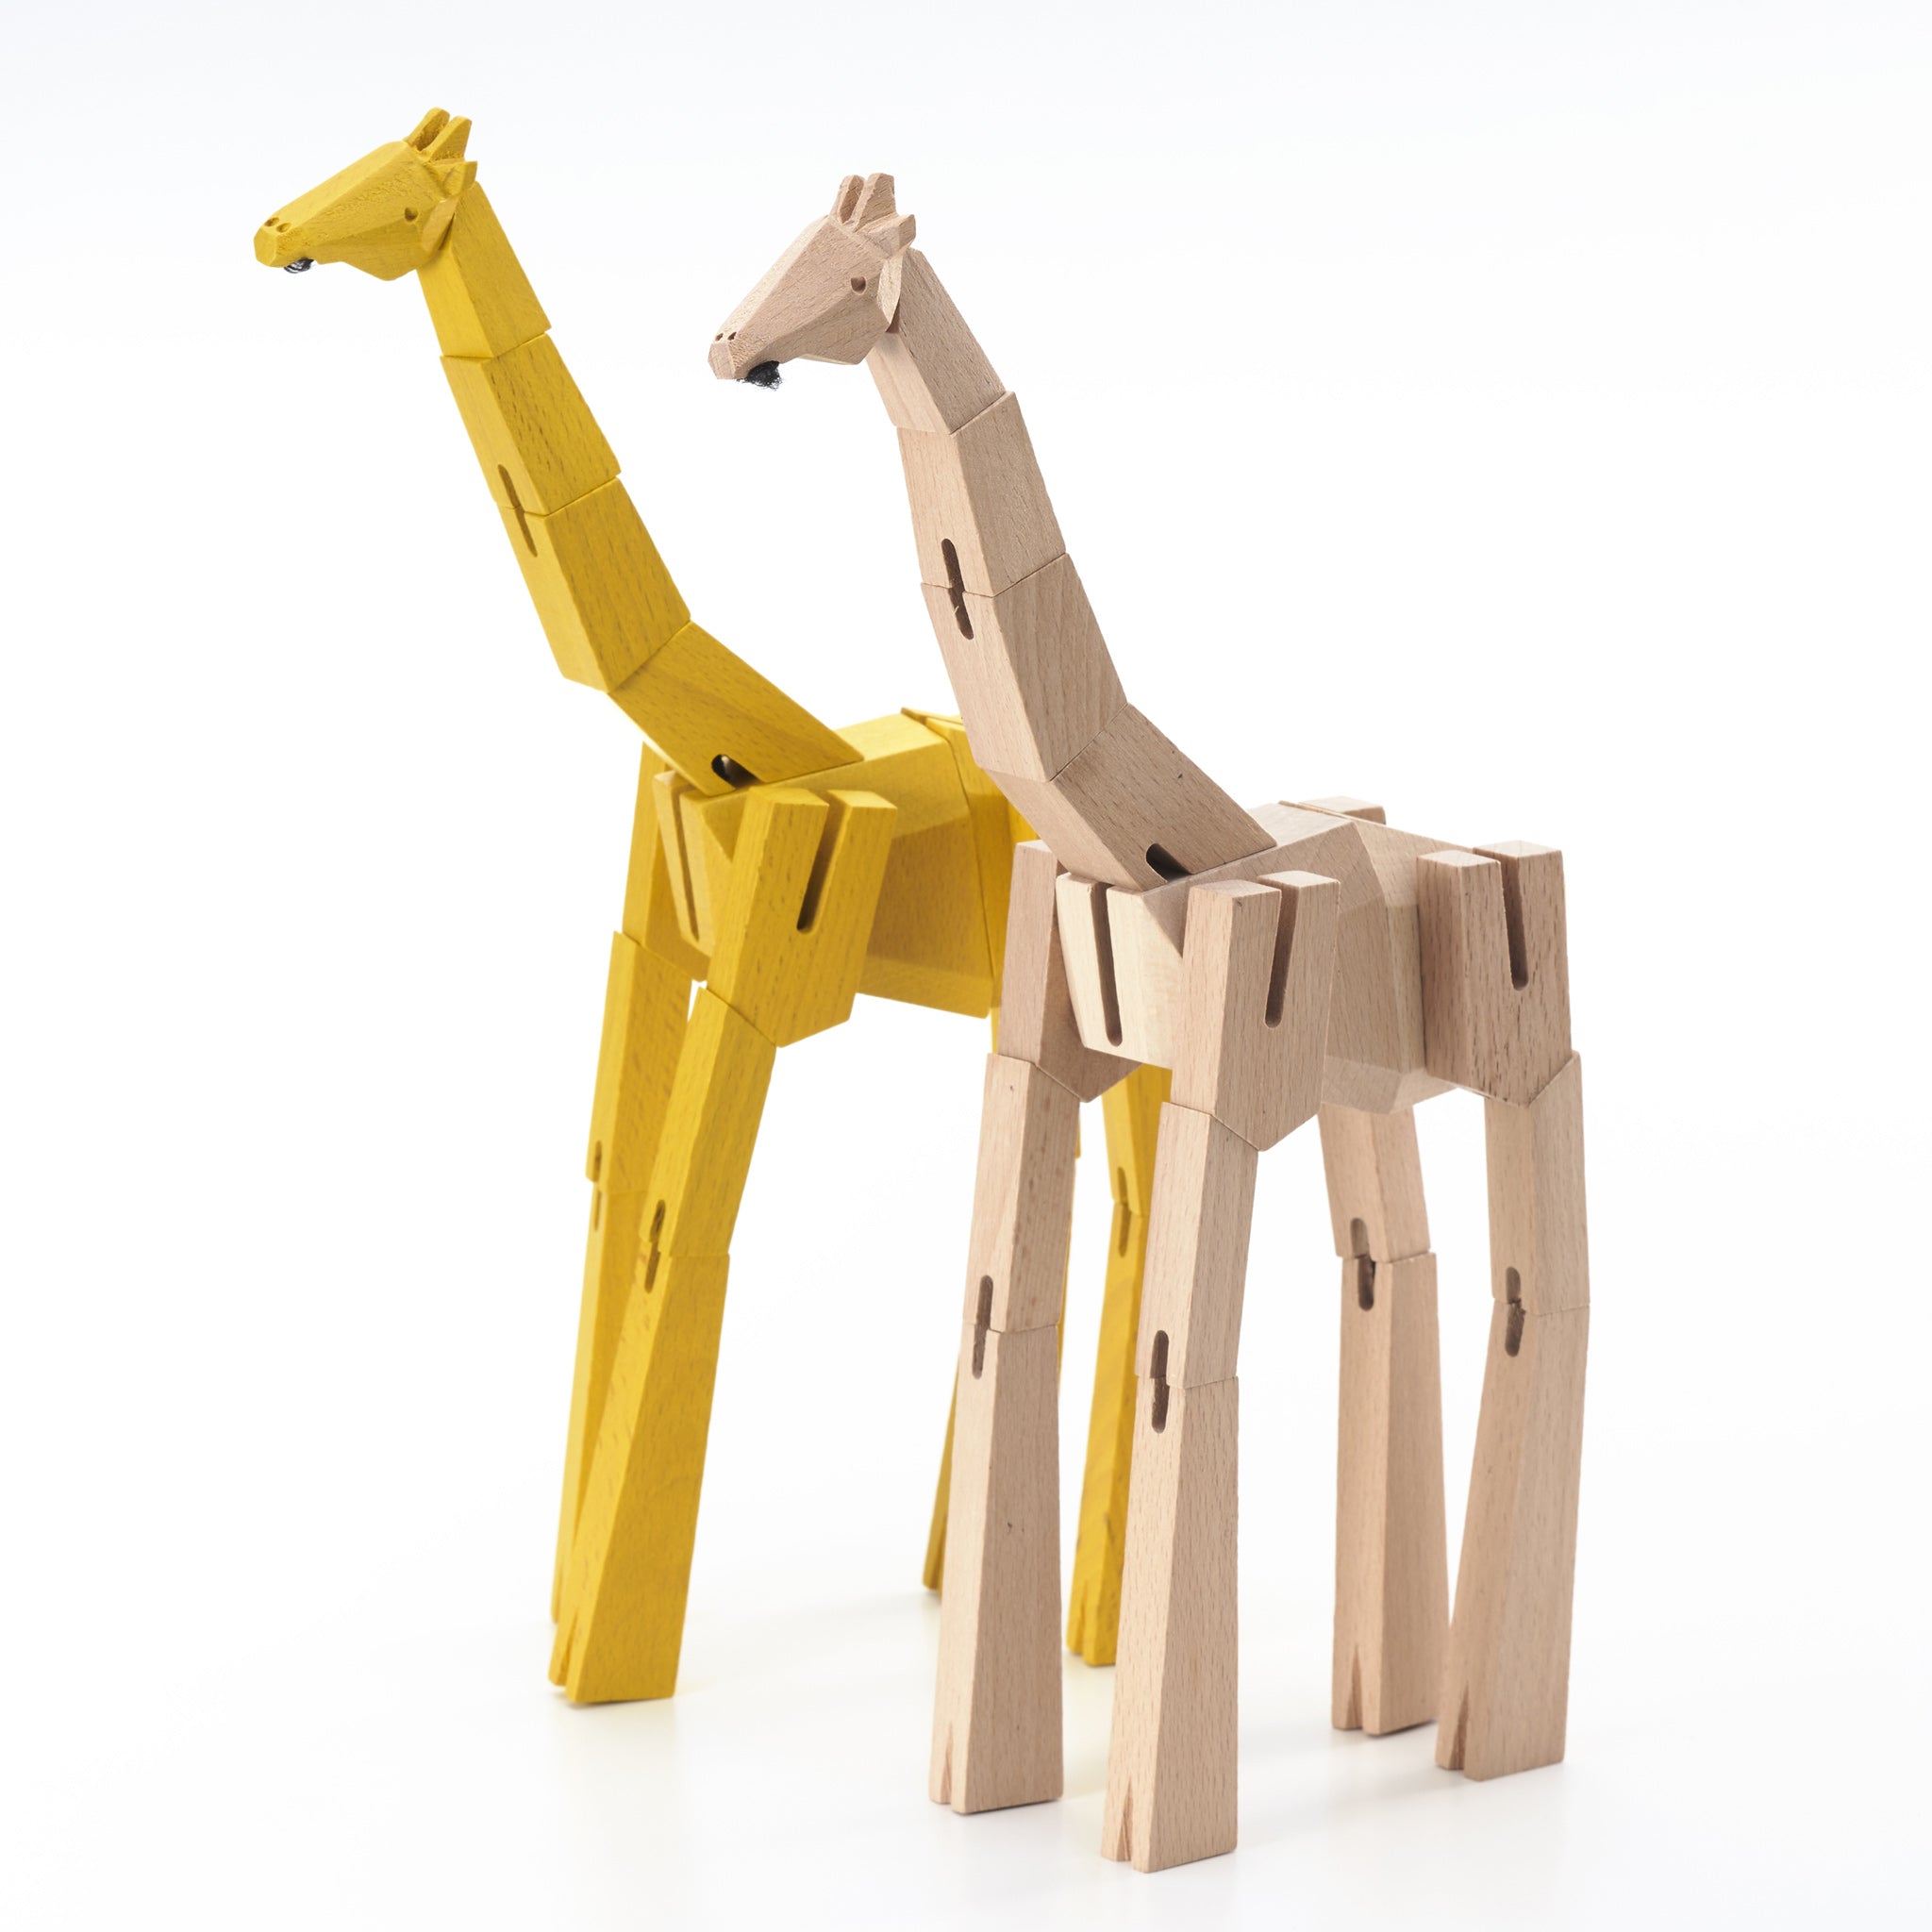 Morphits ® Giraffe Wooden Toy Playset Puzzle Natural and Yellow